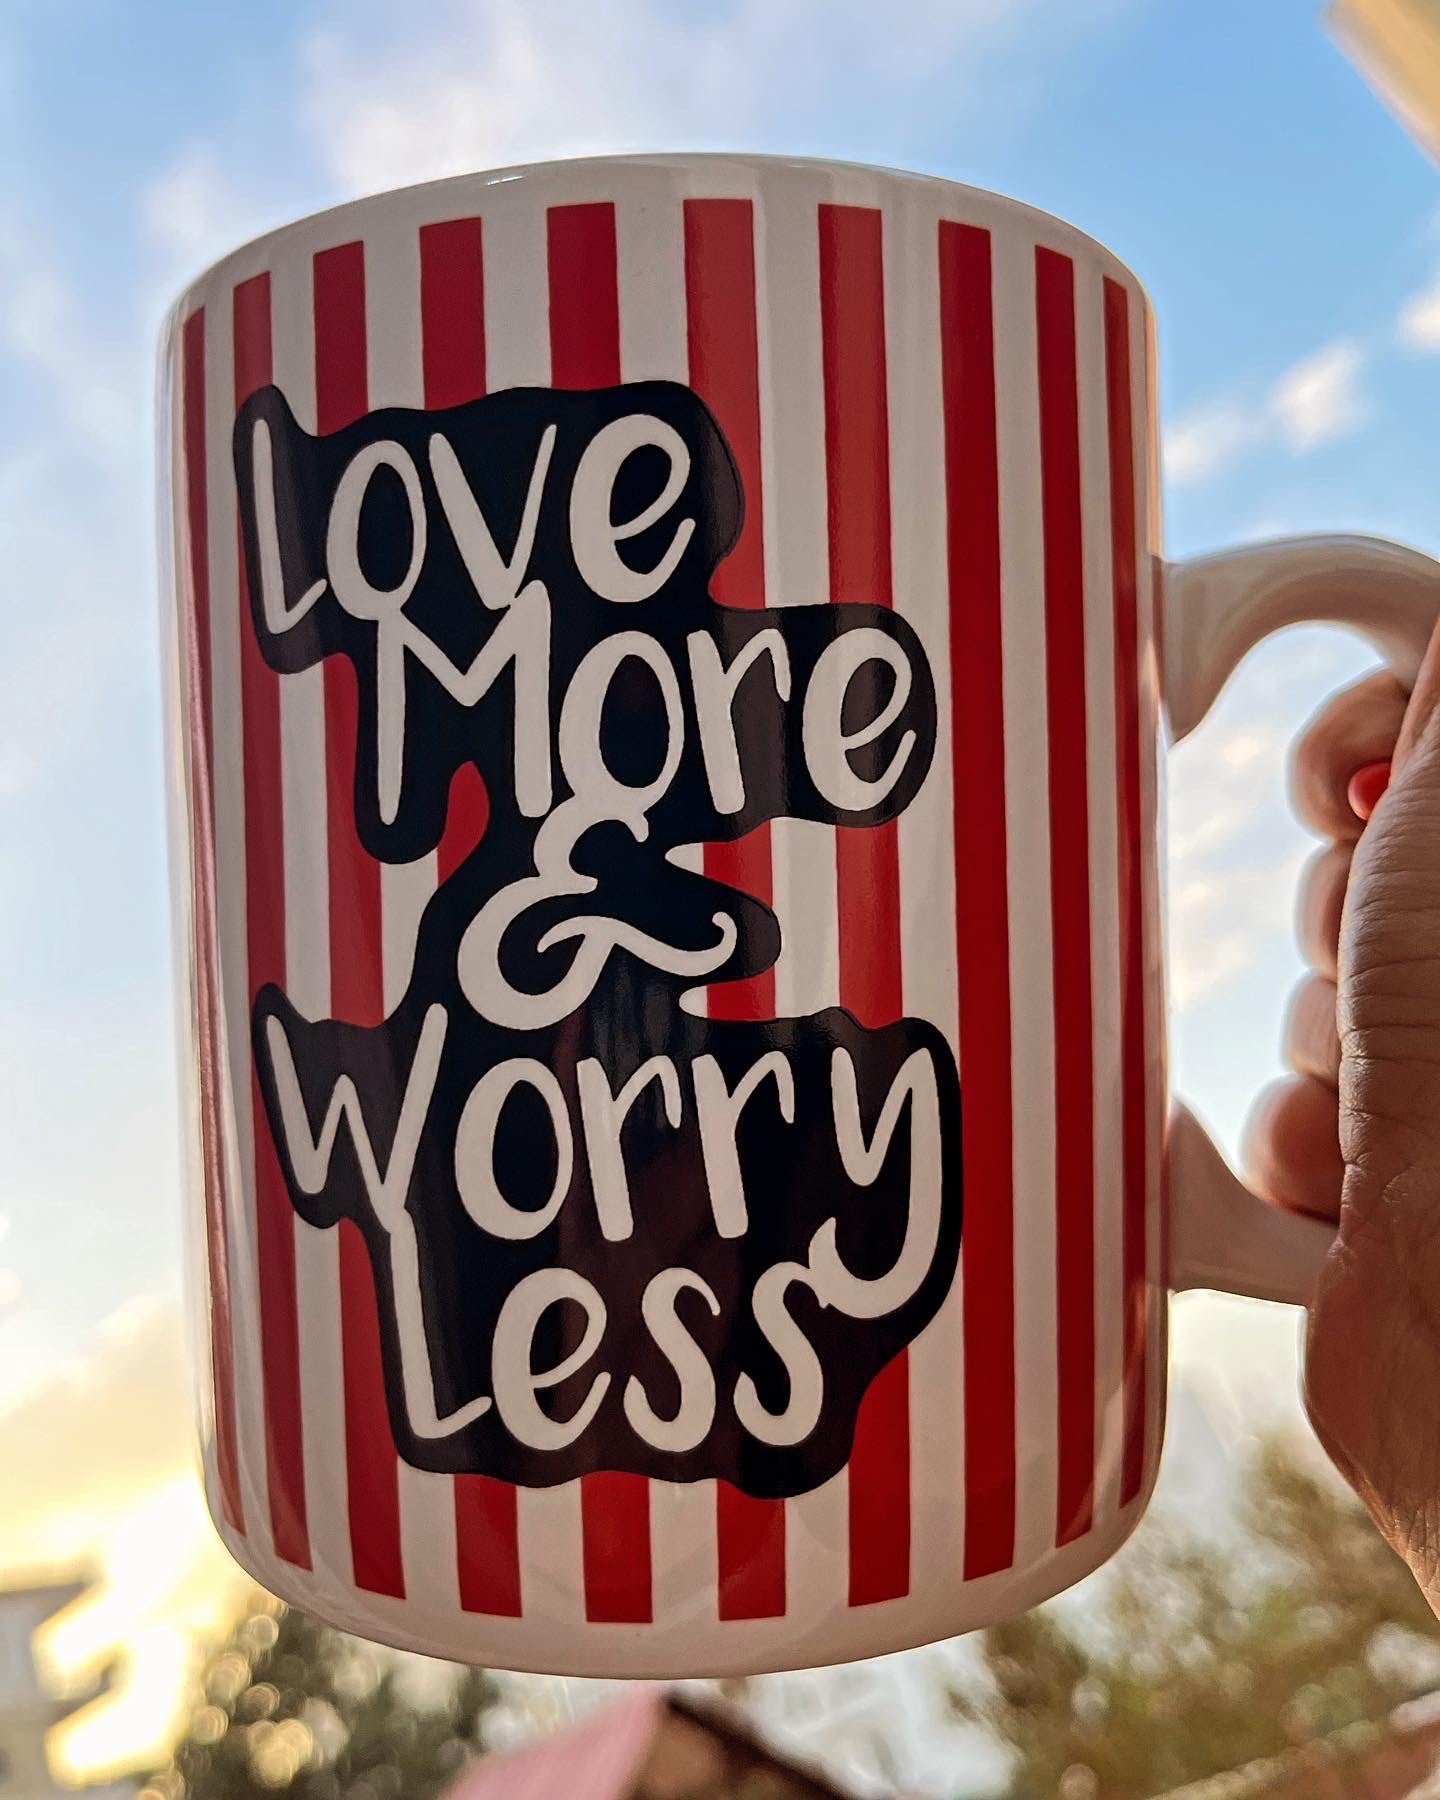 Love more& worry less